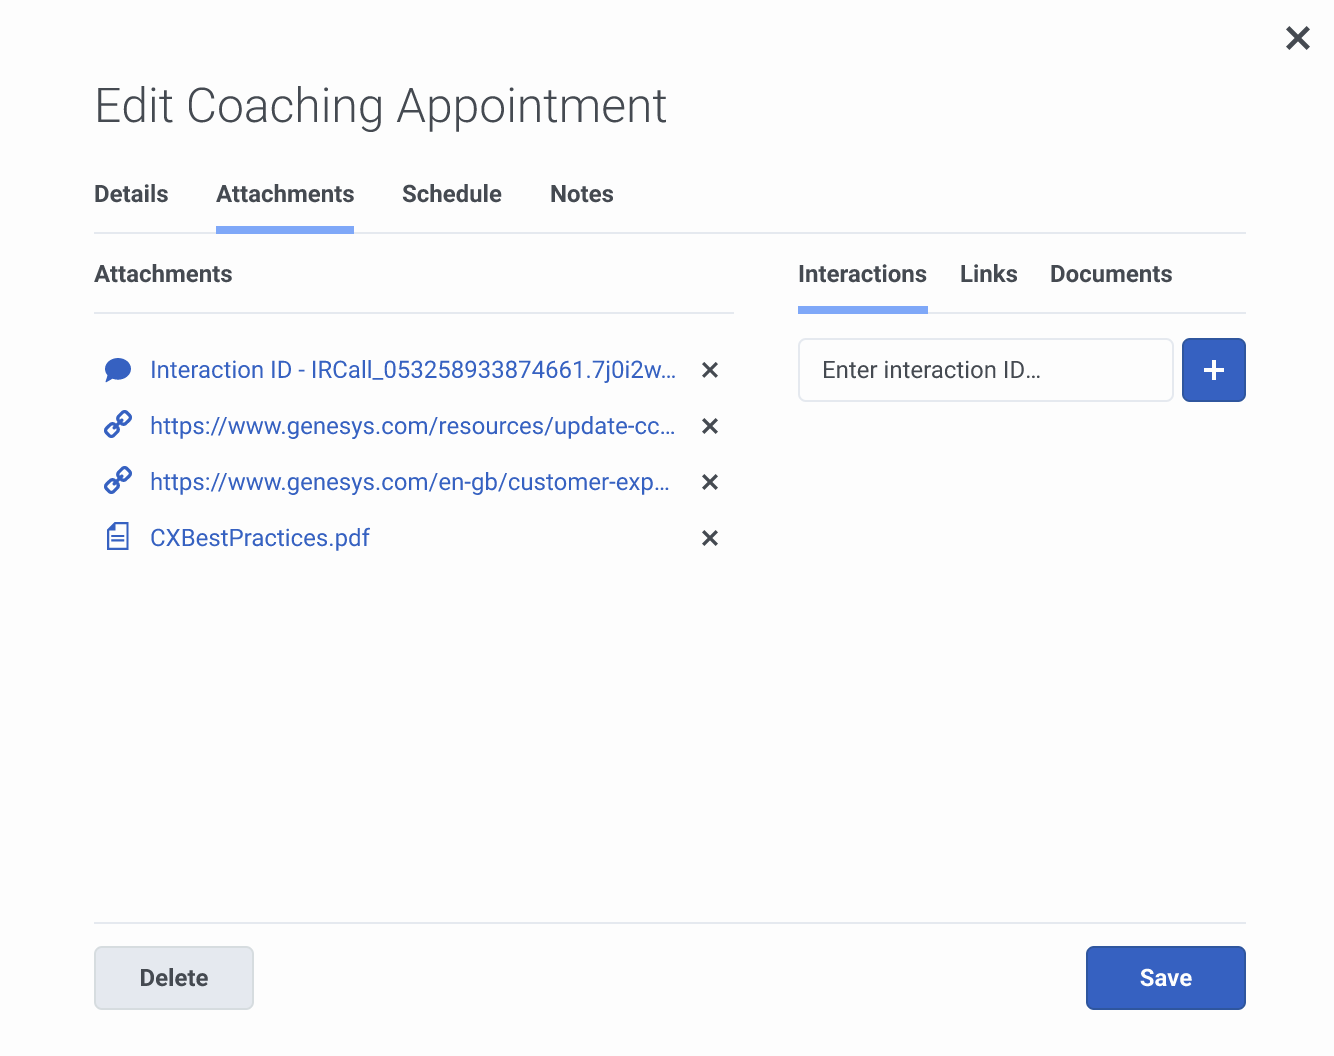 Edit a coaching appointment - Genesys Cloud Resource Center